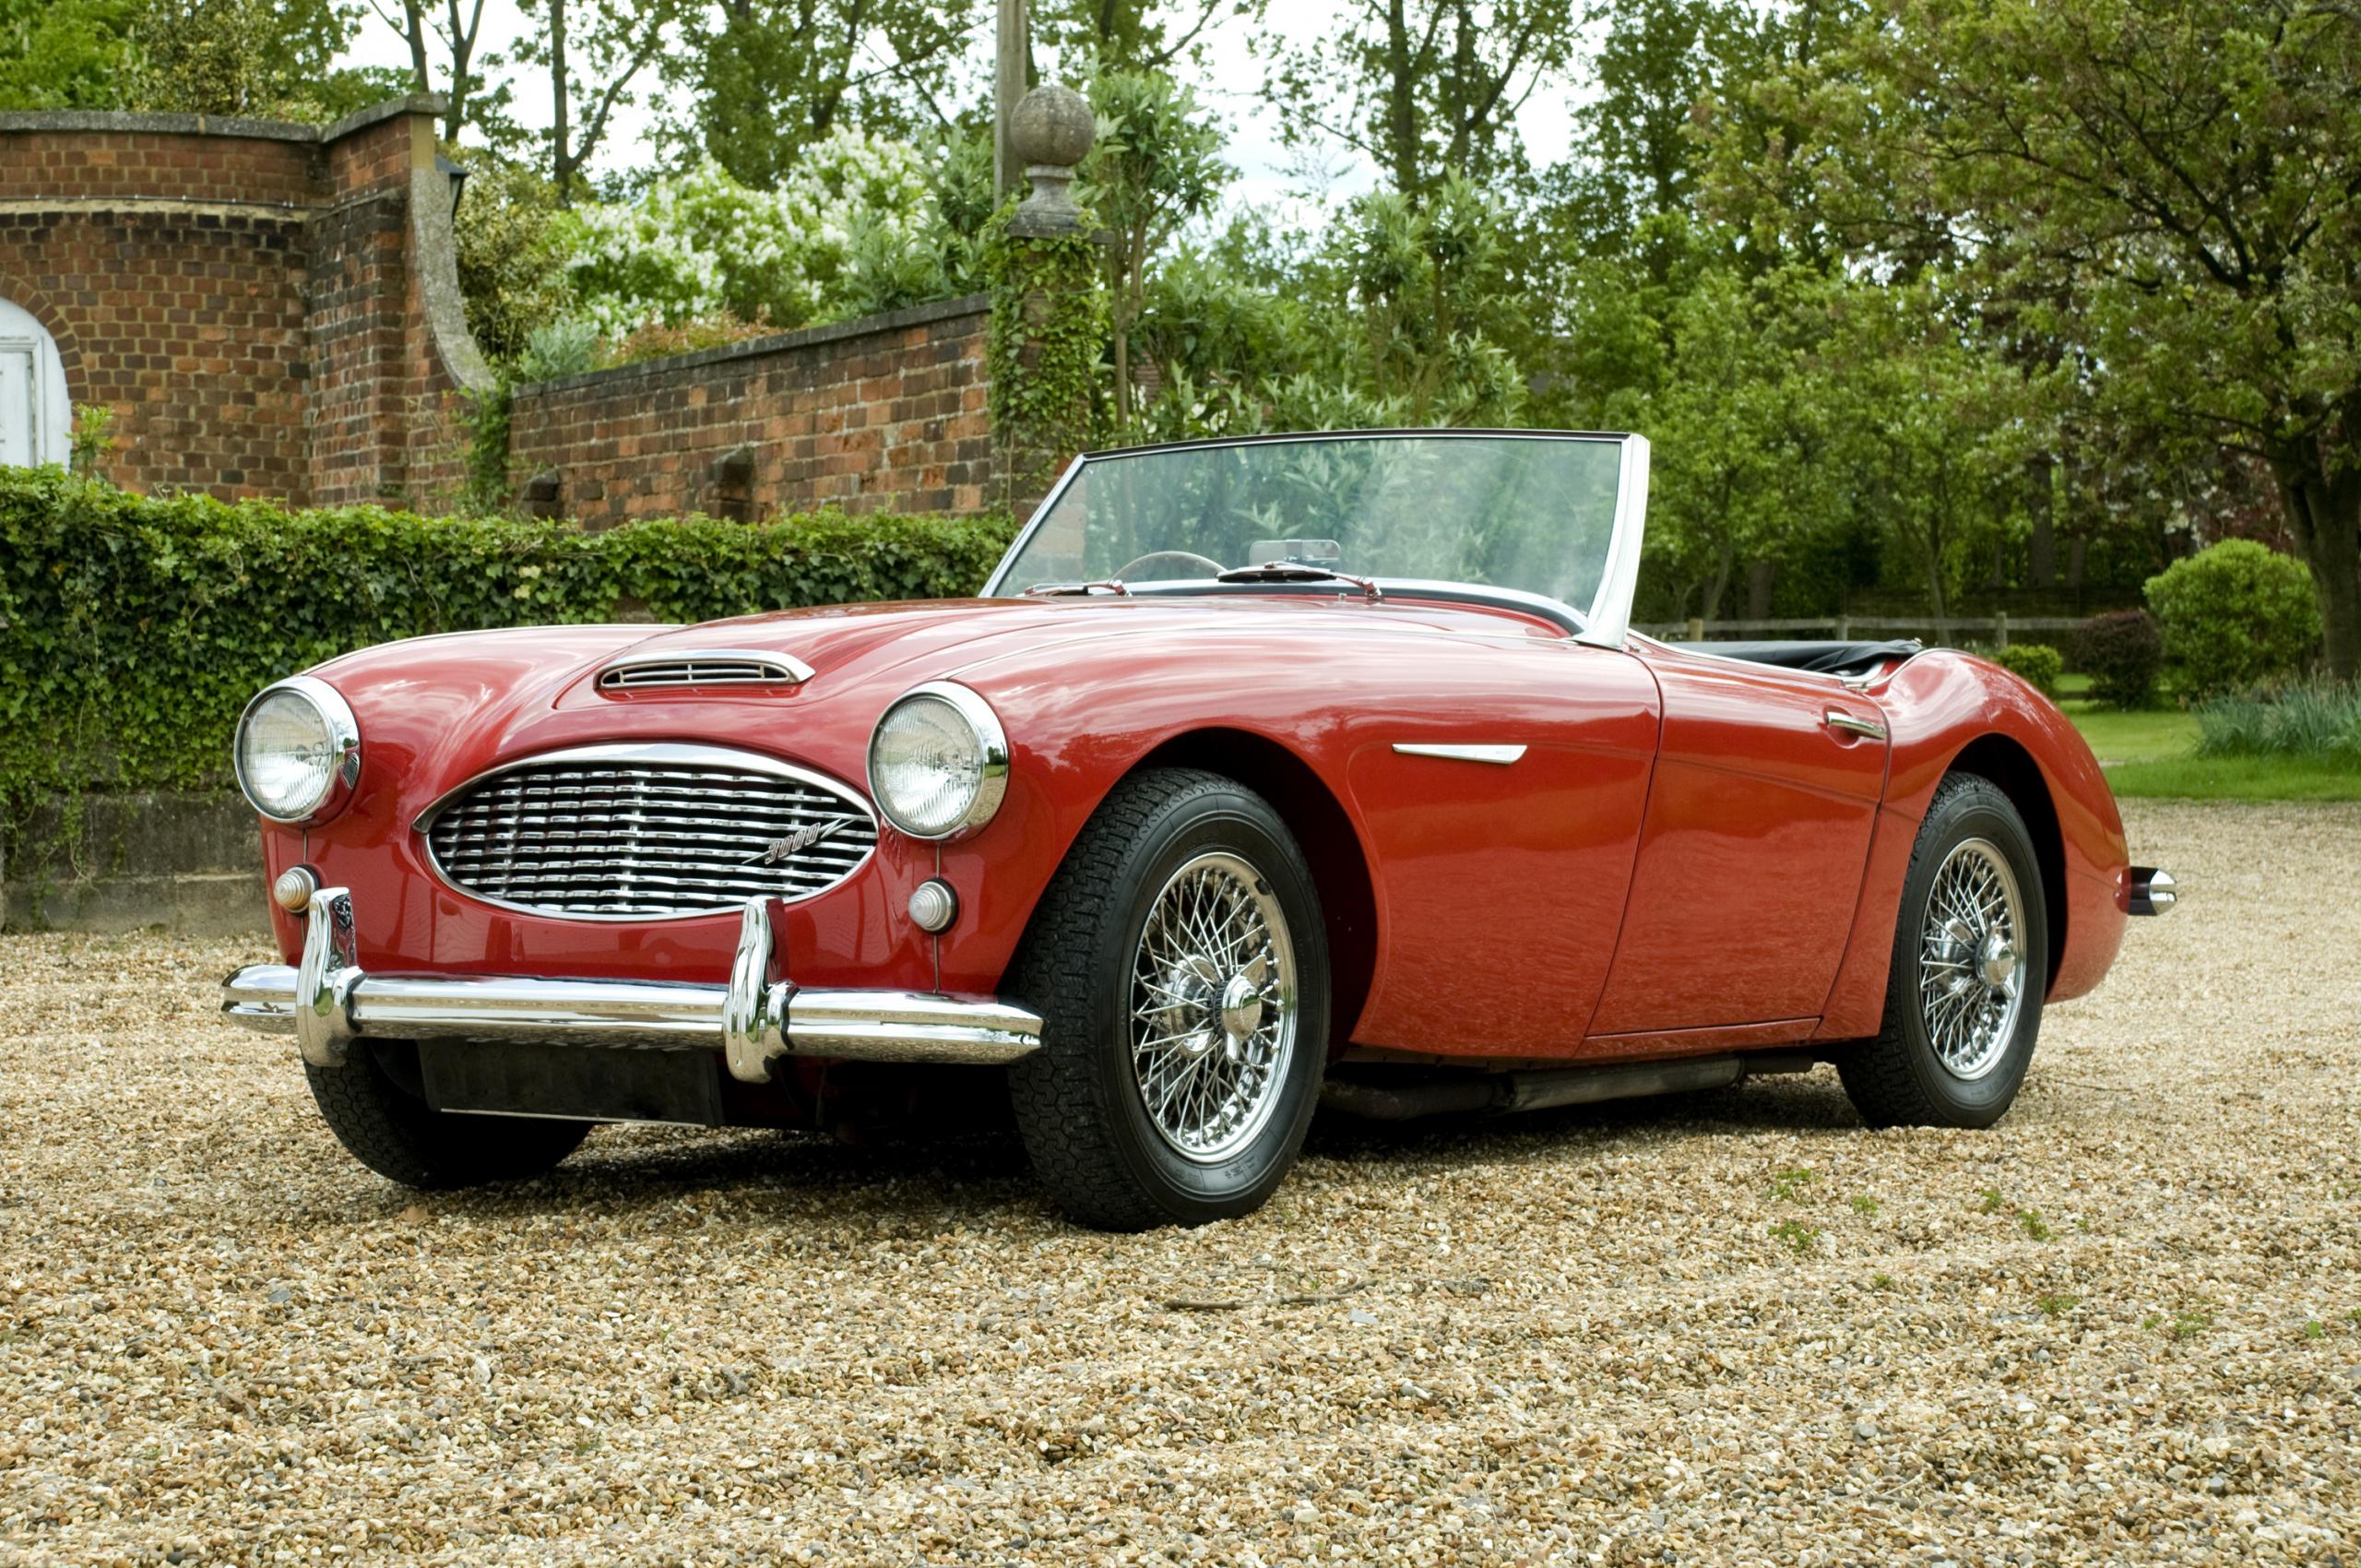 A classic red sports car parked on gravel drive seen from the side